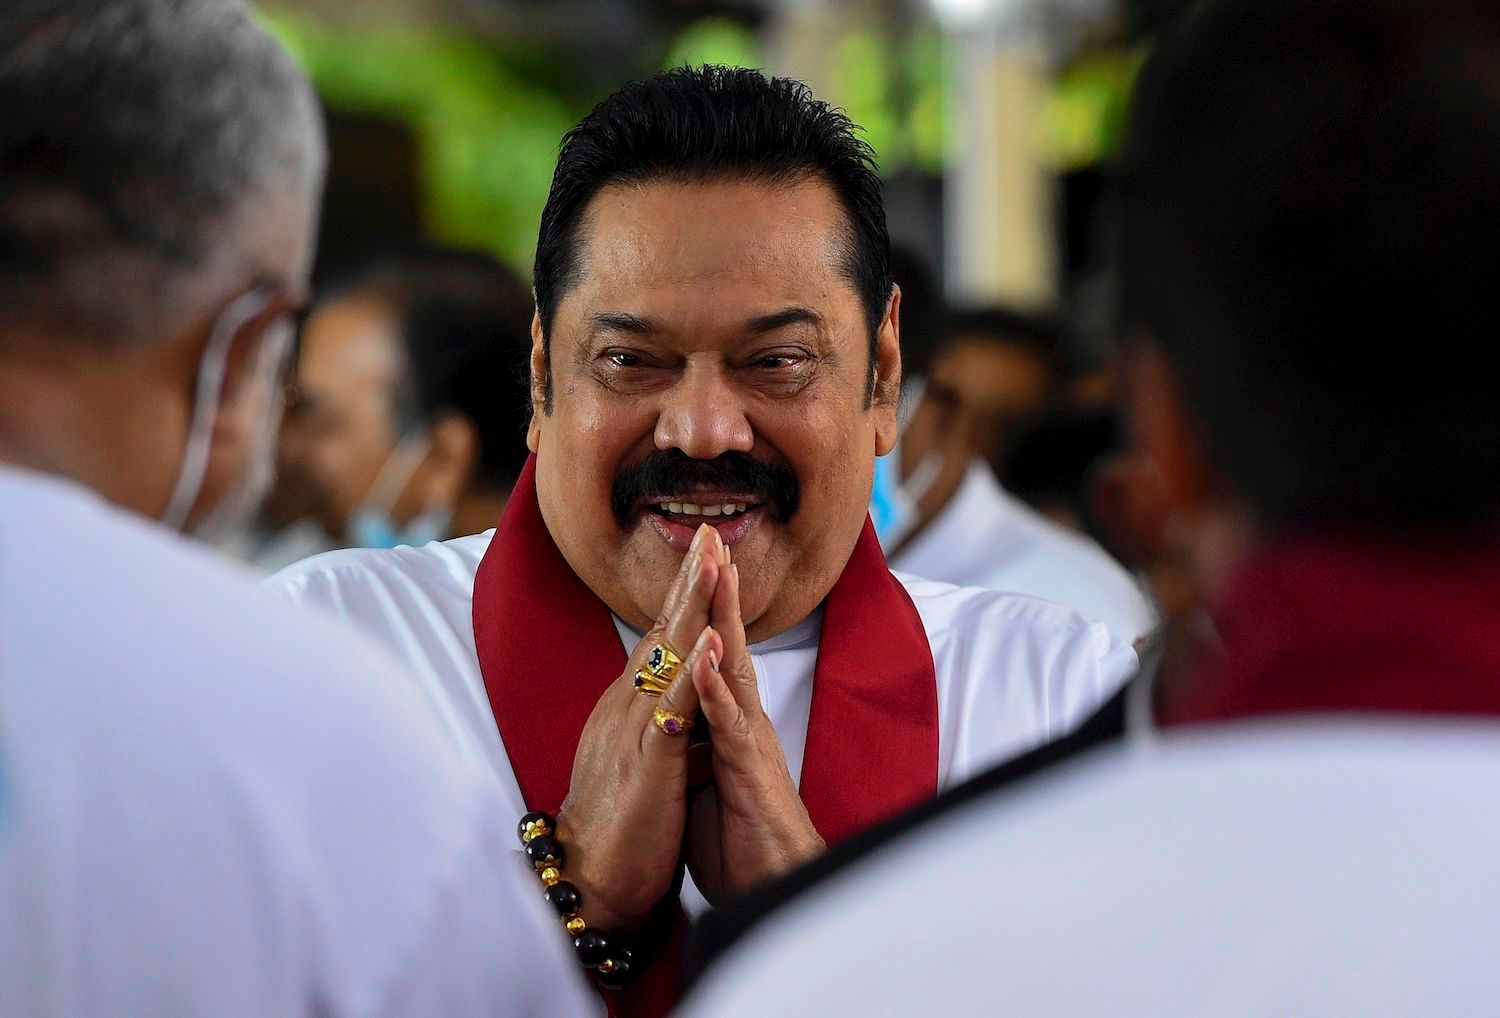 Sri Lanka's Prime Minister Mahinda Rajapaksa (C) greets as he arrives at his swearing-in ceremony at the sacred Kelaniya Raja Maha Buddhist temple, outside the capital Colombo on August 9, 2020. - Sri Lanka's ruling Rajapaksa brothers won an unprecedented two-thirds majority at the August 5 parliamentary elections that allowed them to rewrite the constitution and increase their power. (Photo by Ishara S. KODIKARA / AFP) (Photo by ISHARA S. KODIKARA/AFP via Getty Images)